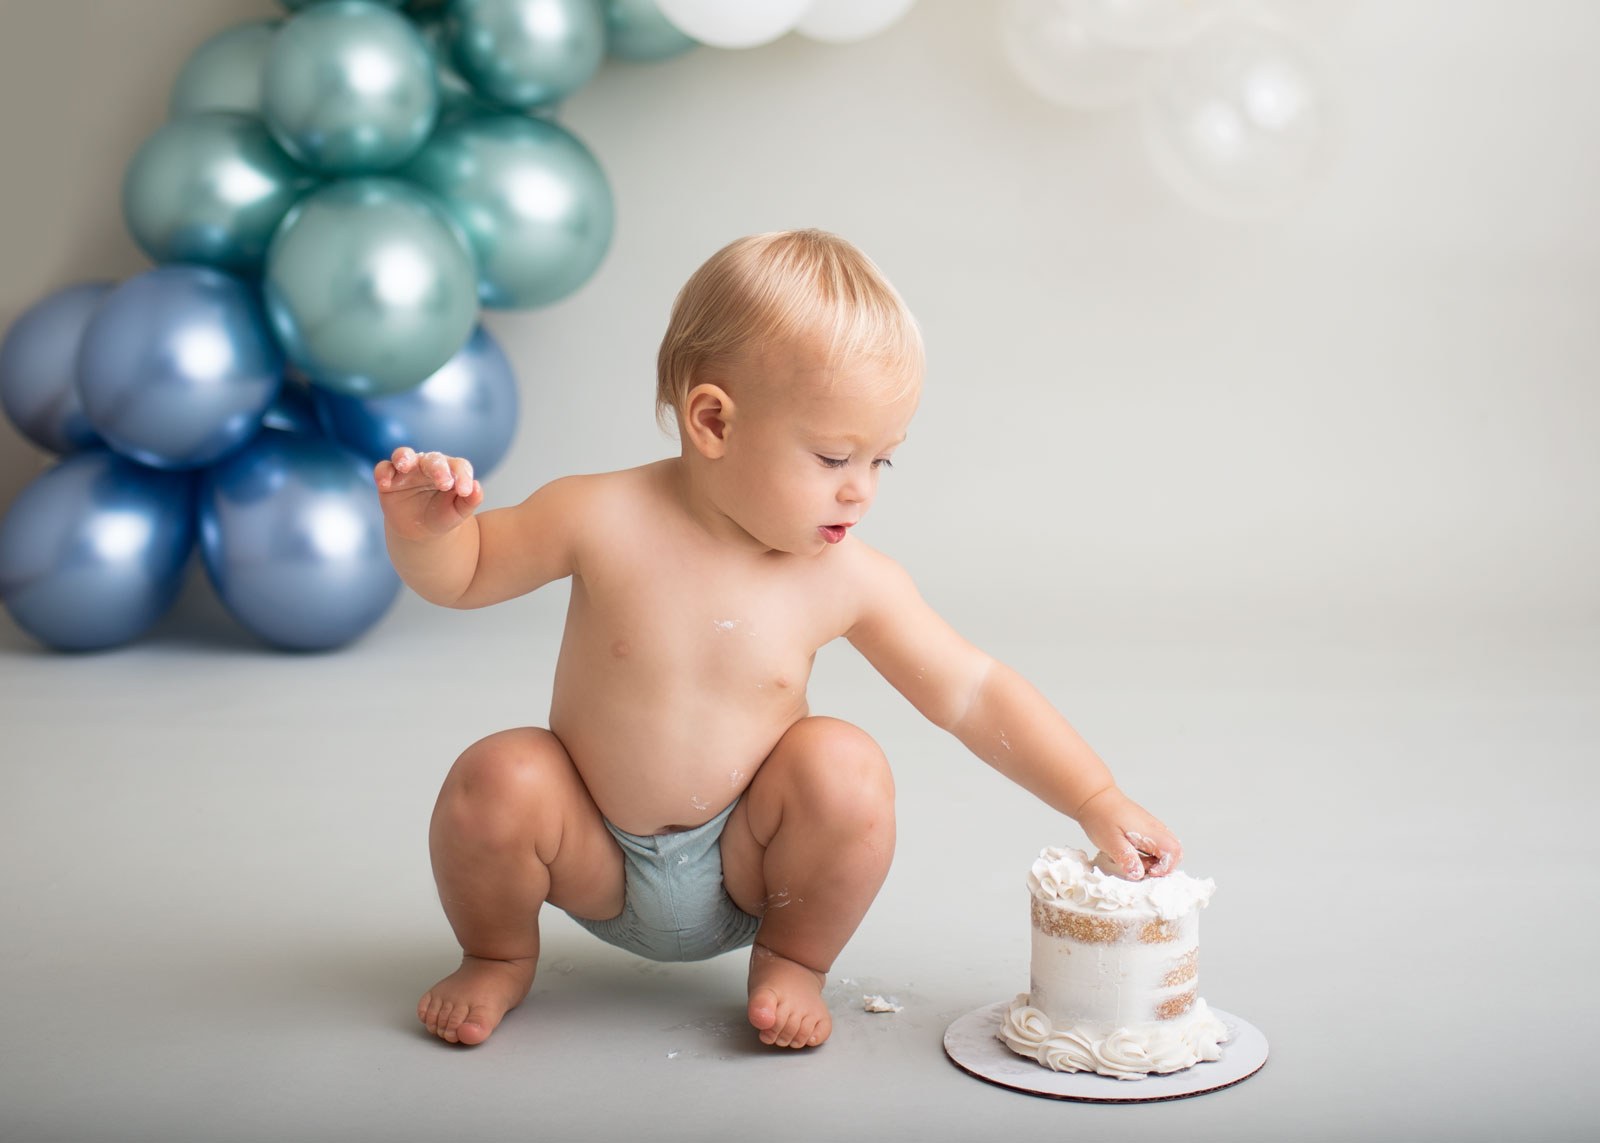 little boy squatting with his hand in cake